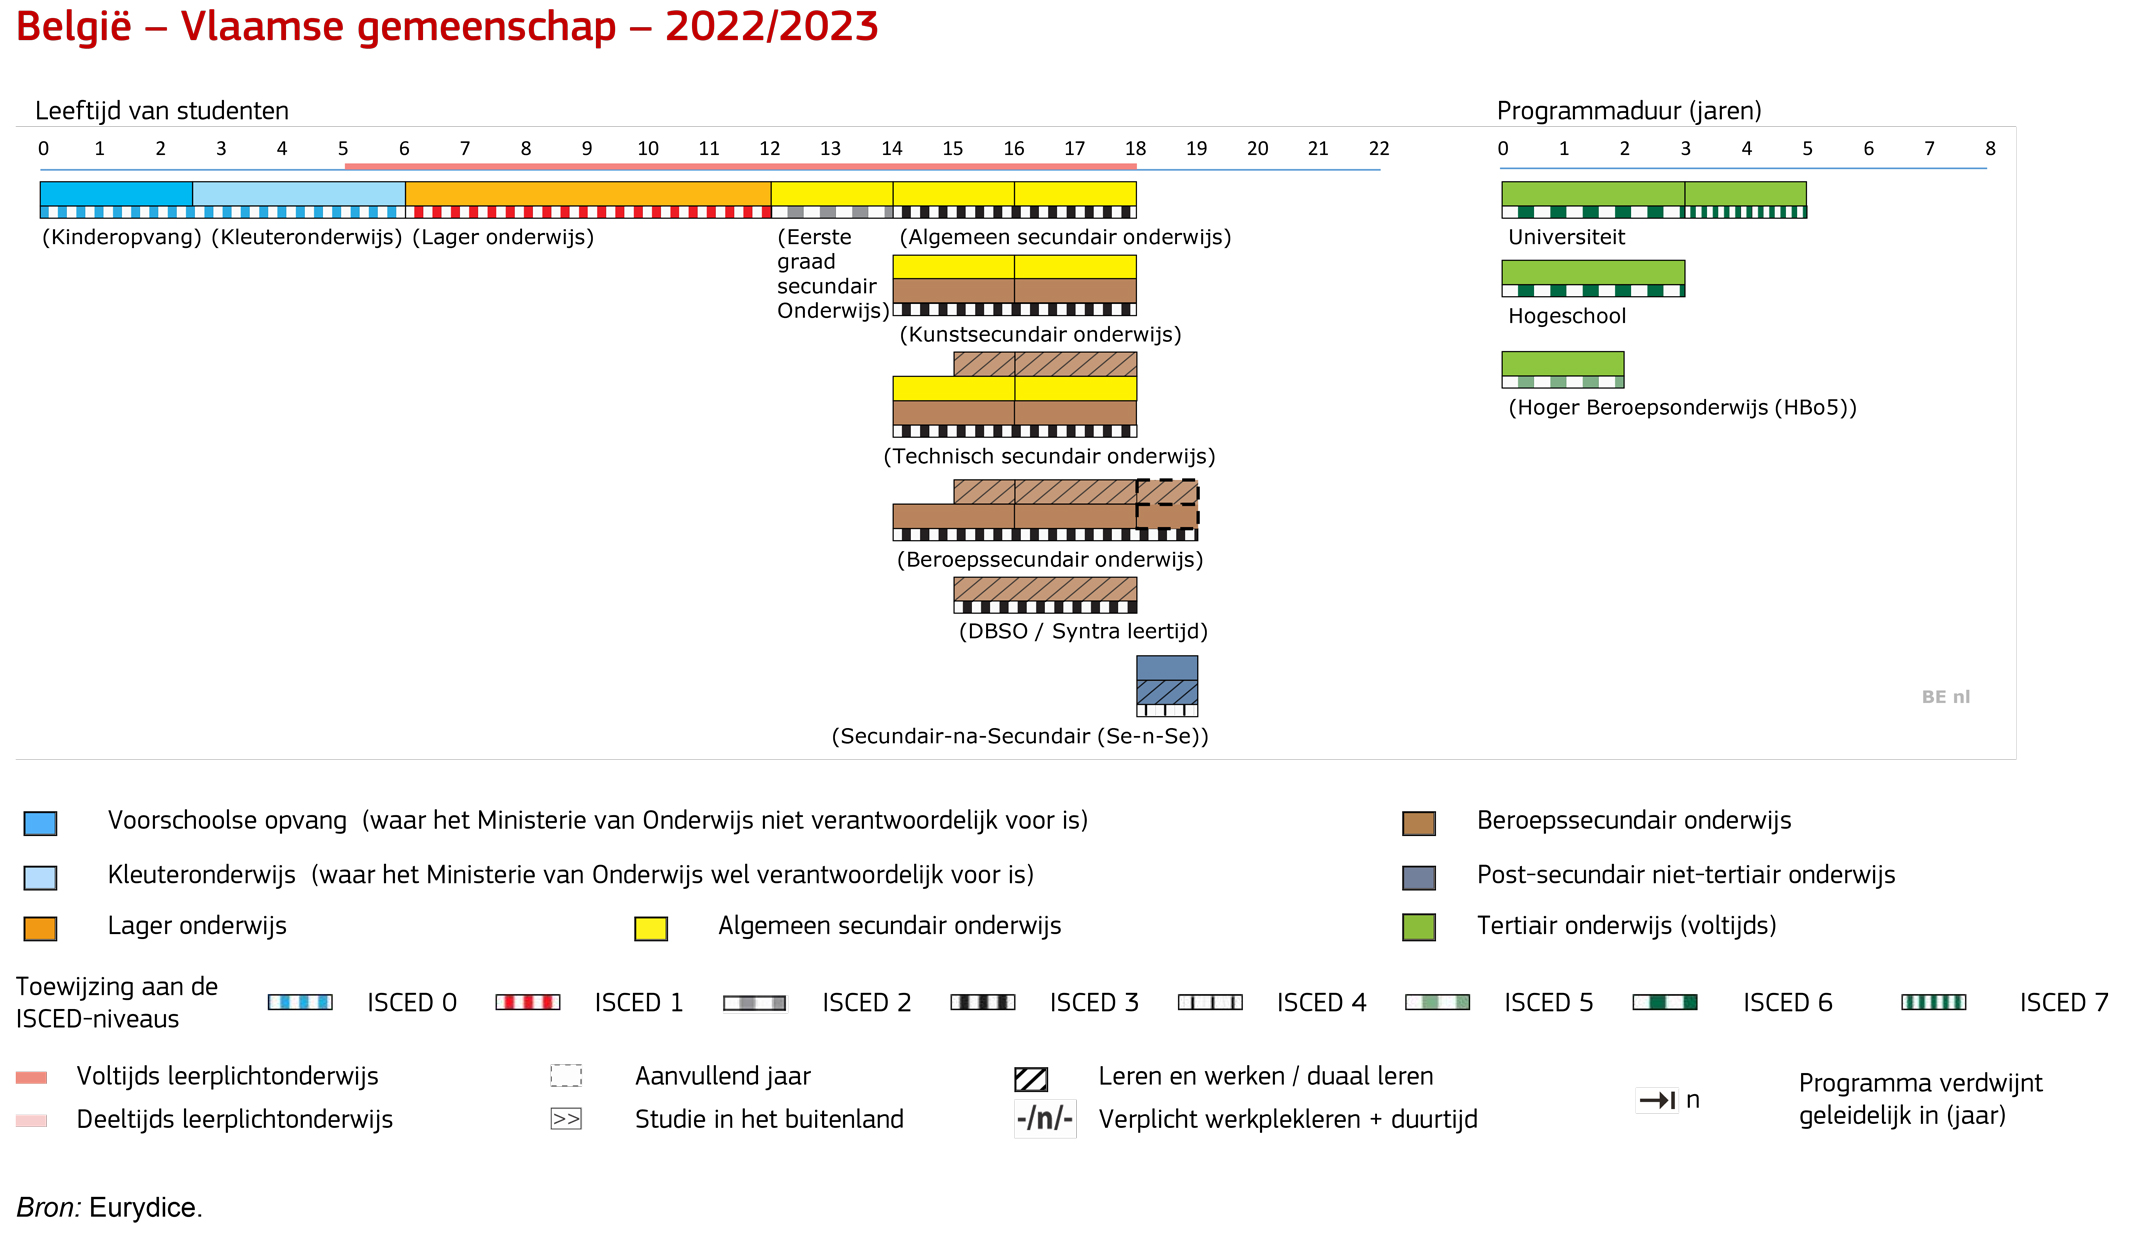 Structure of the National Education System  BE nl